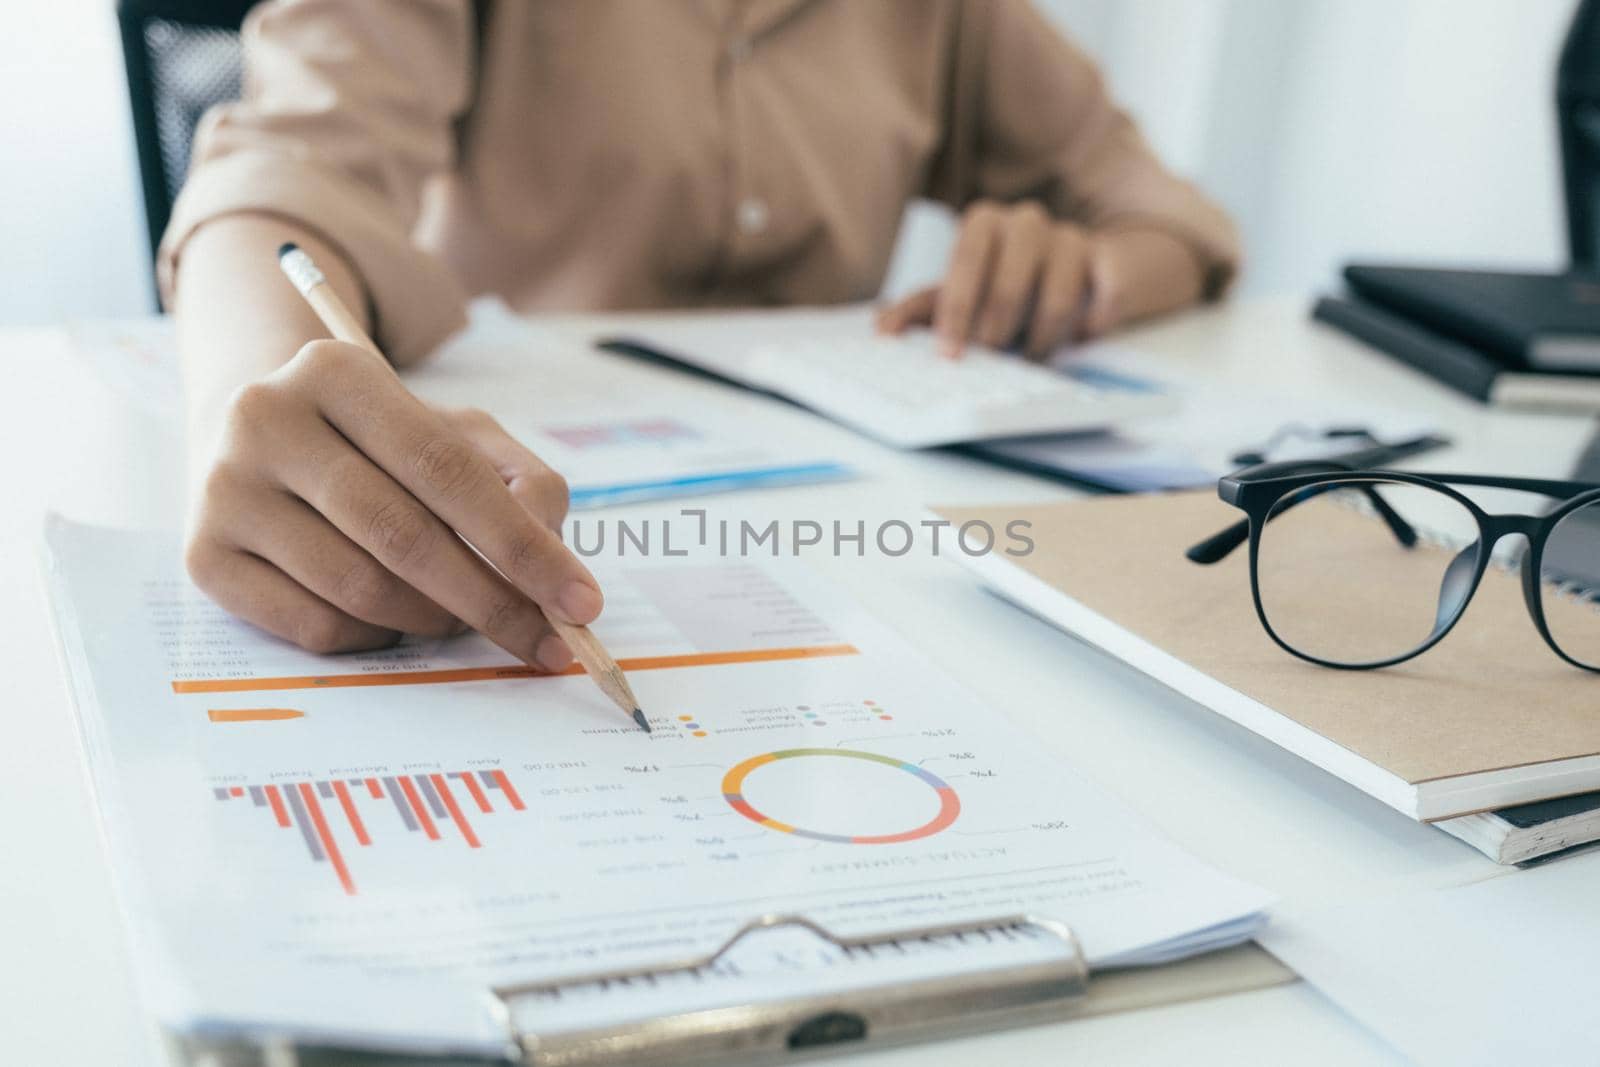 Businessman planning and analyse investment marketing data.